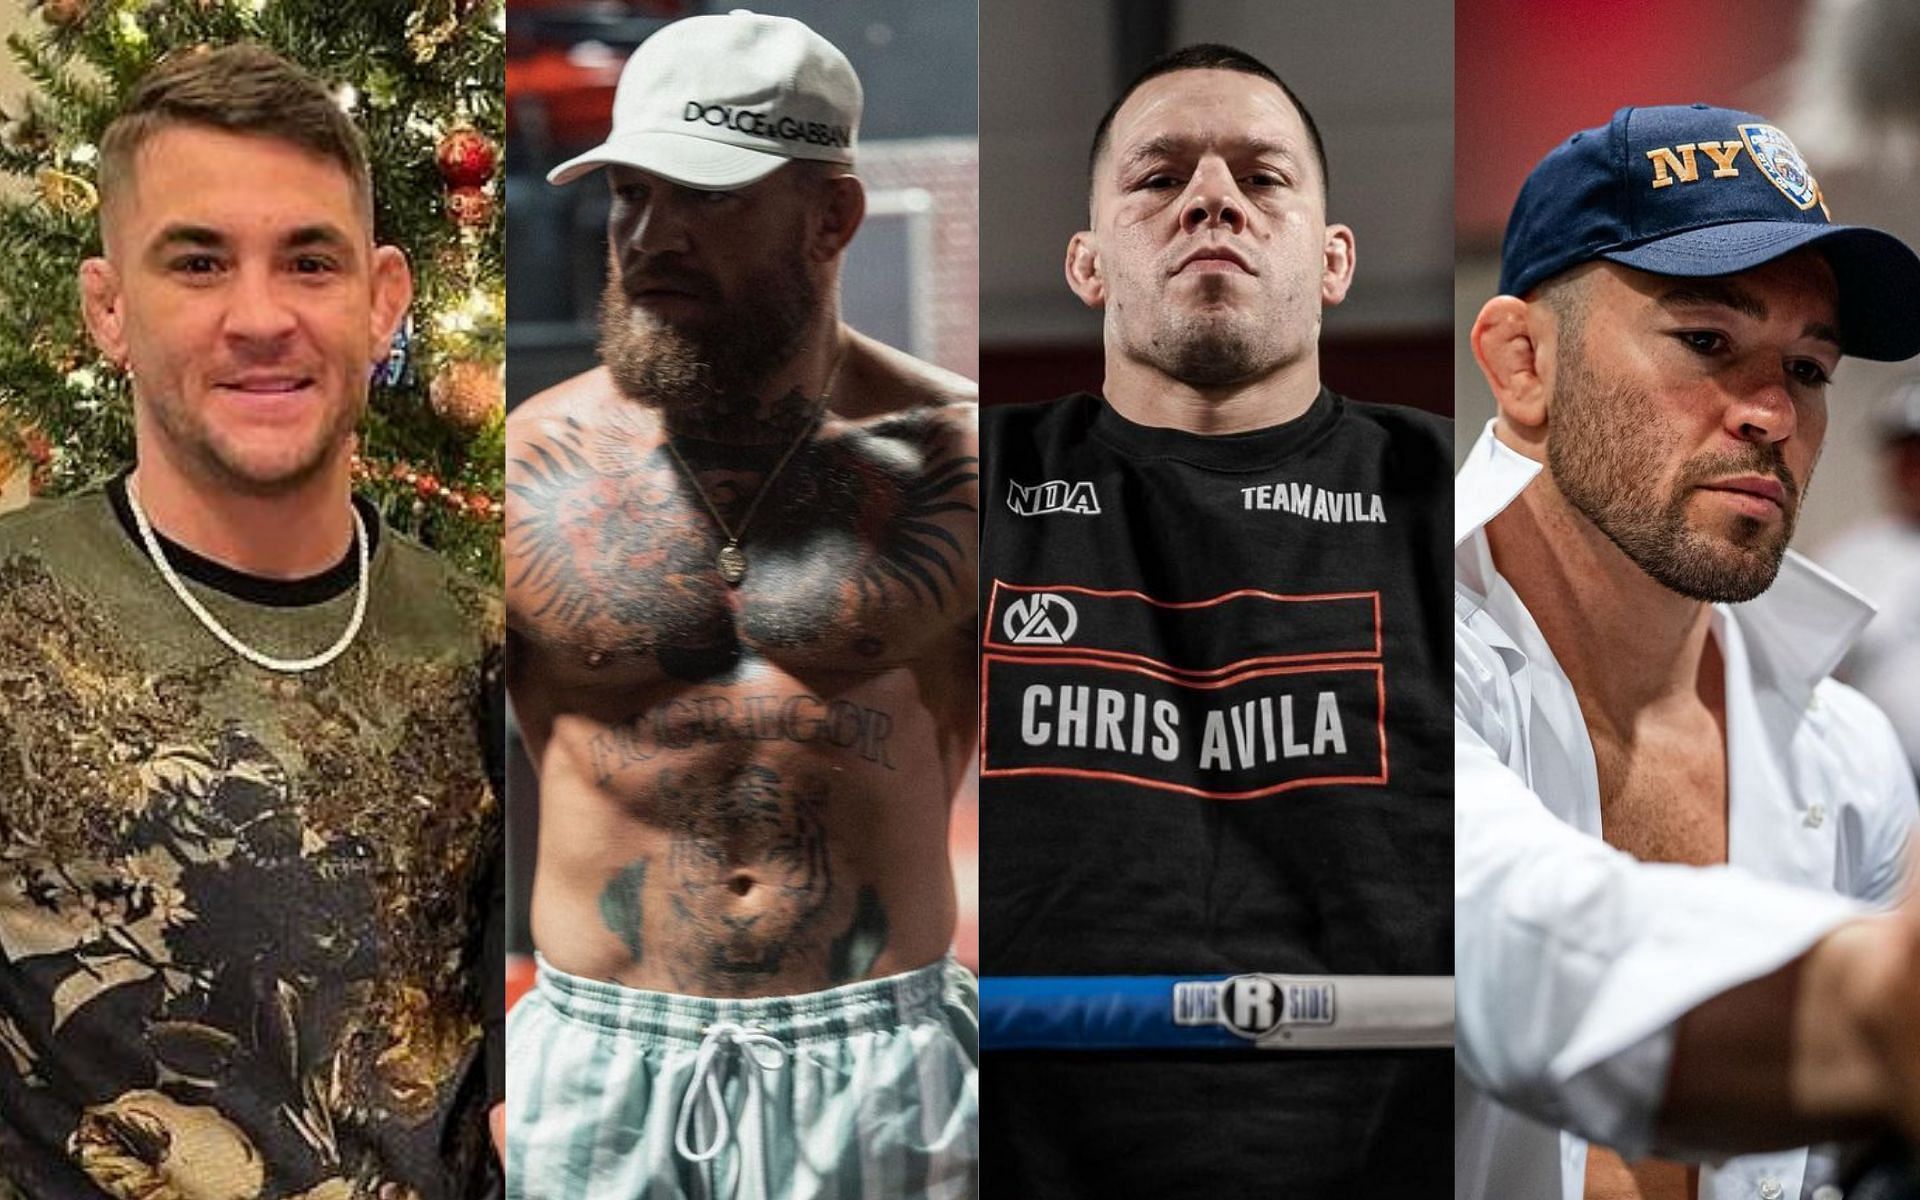 Dustin Poirier, Conor McGregor, Nate Diaz, and Colby Covington (left to right) [Image Courtesy: @ dustinpoirier, @thenotoriousmma, @natediaz209 and @colbycovmma on Instagram]